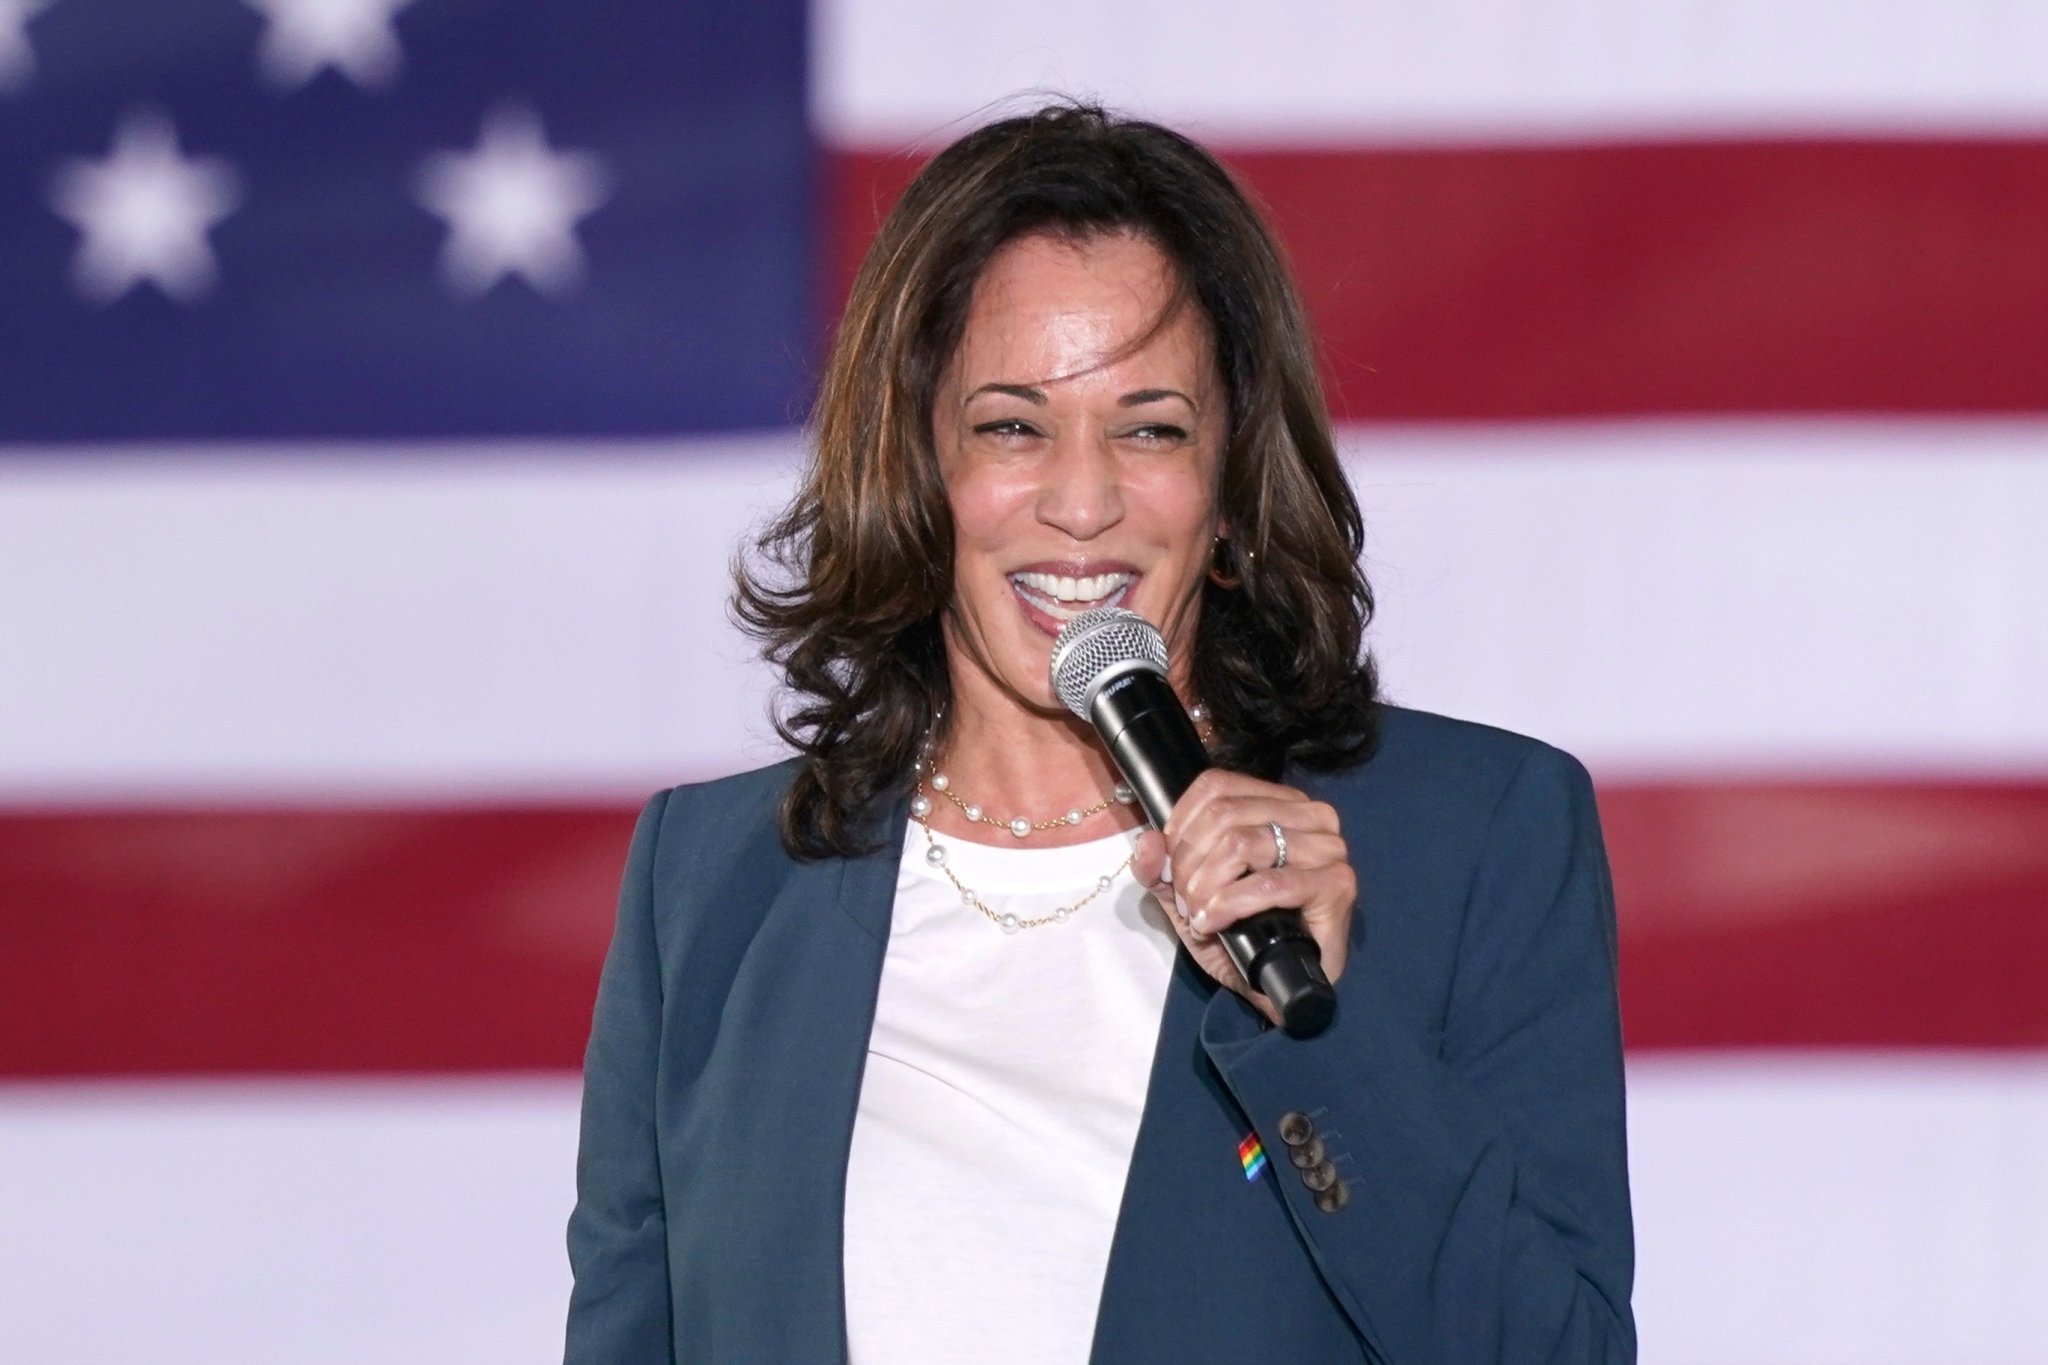 Kamala Harris bursts out laughing when asked if she has socialist perspective